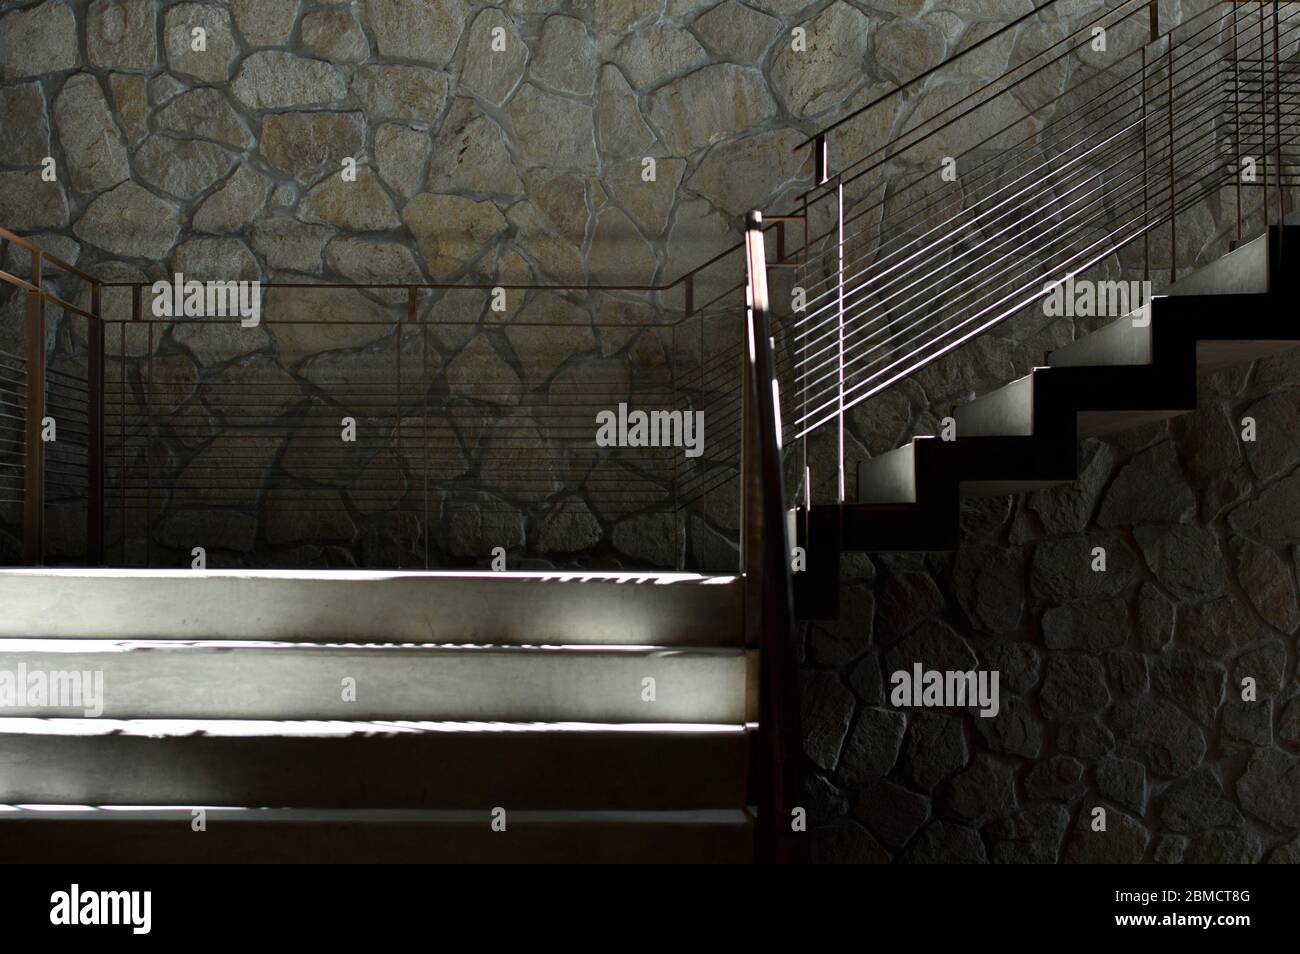 Concrete and metal industrial stairs at the stone wall Stock Photo